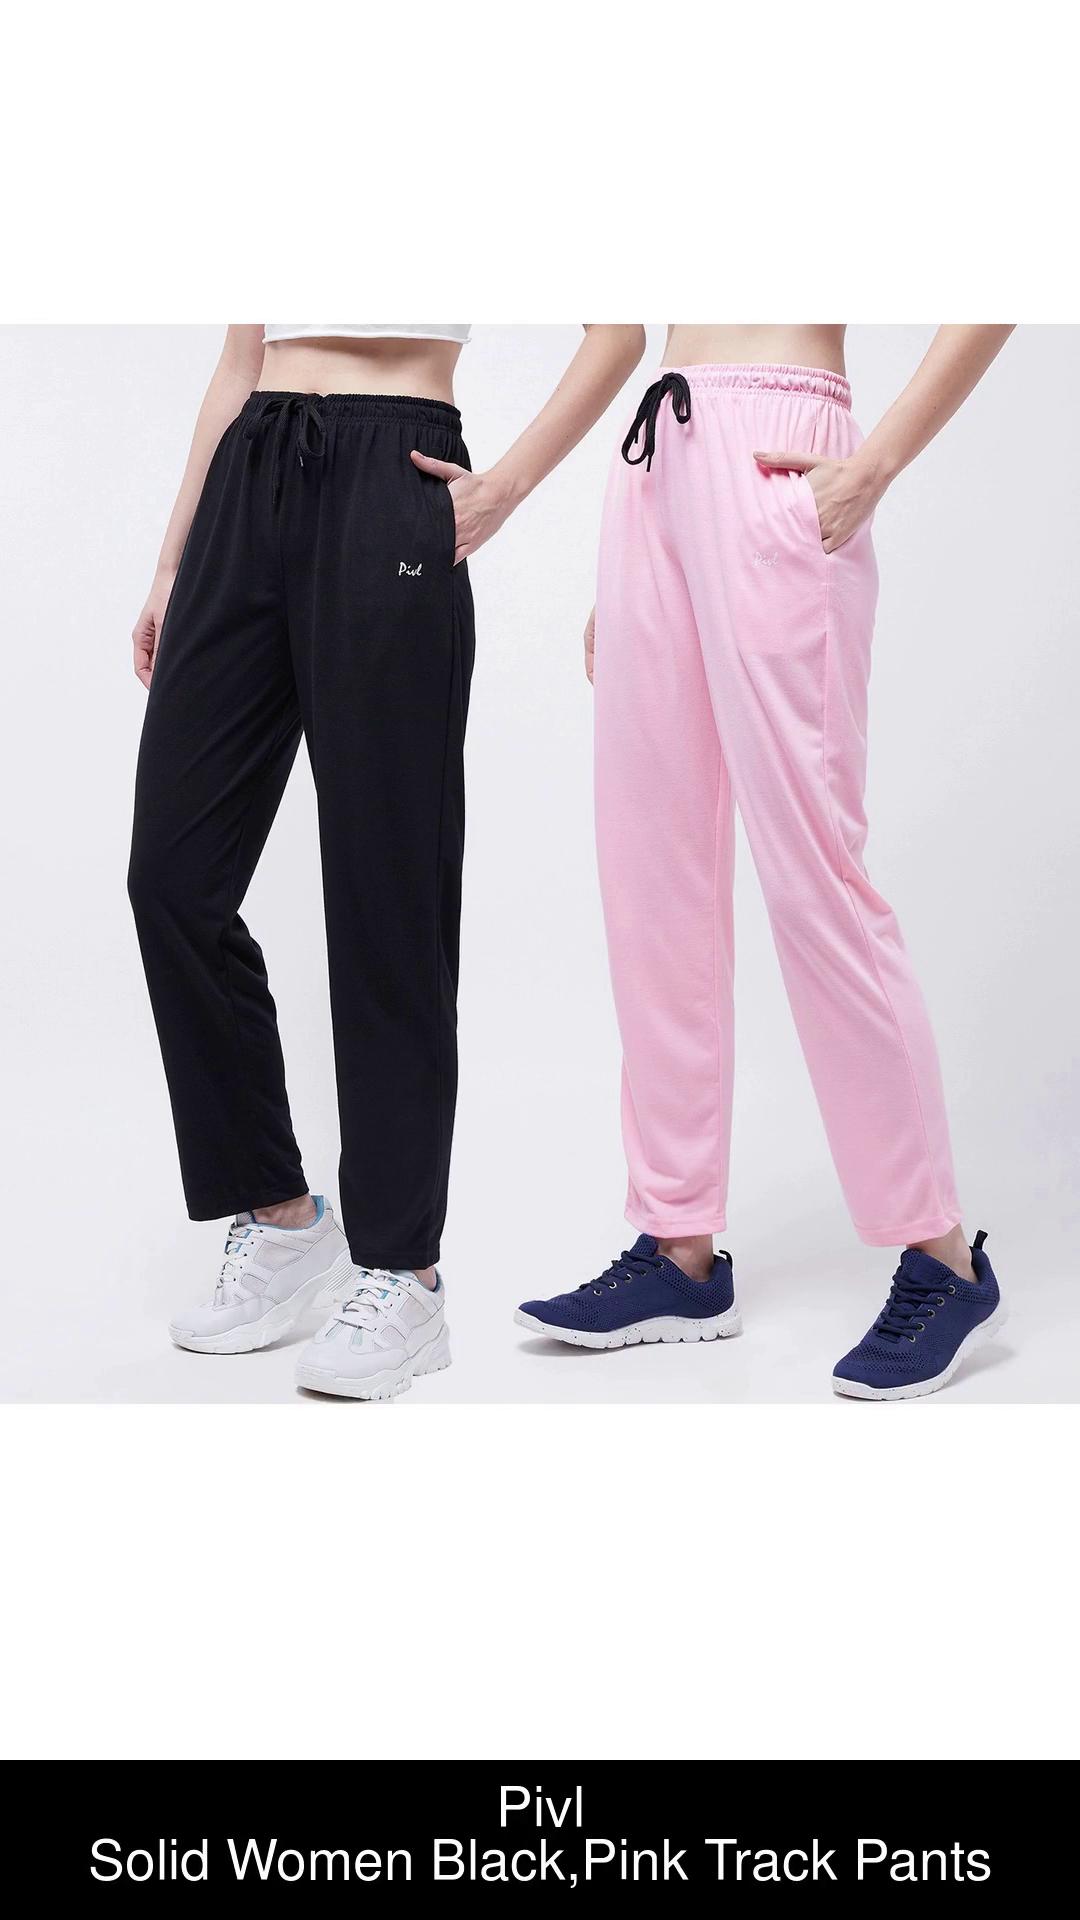 Pink Sweatpants Outfits